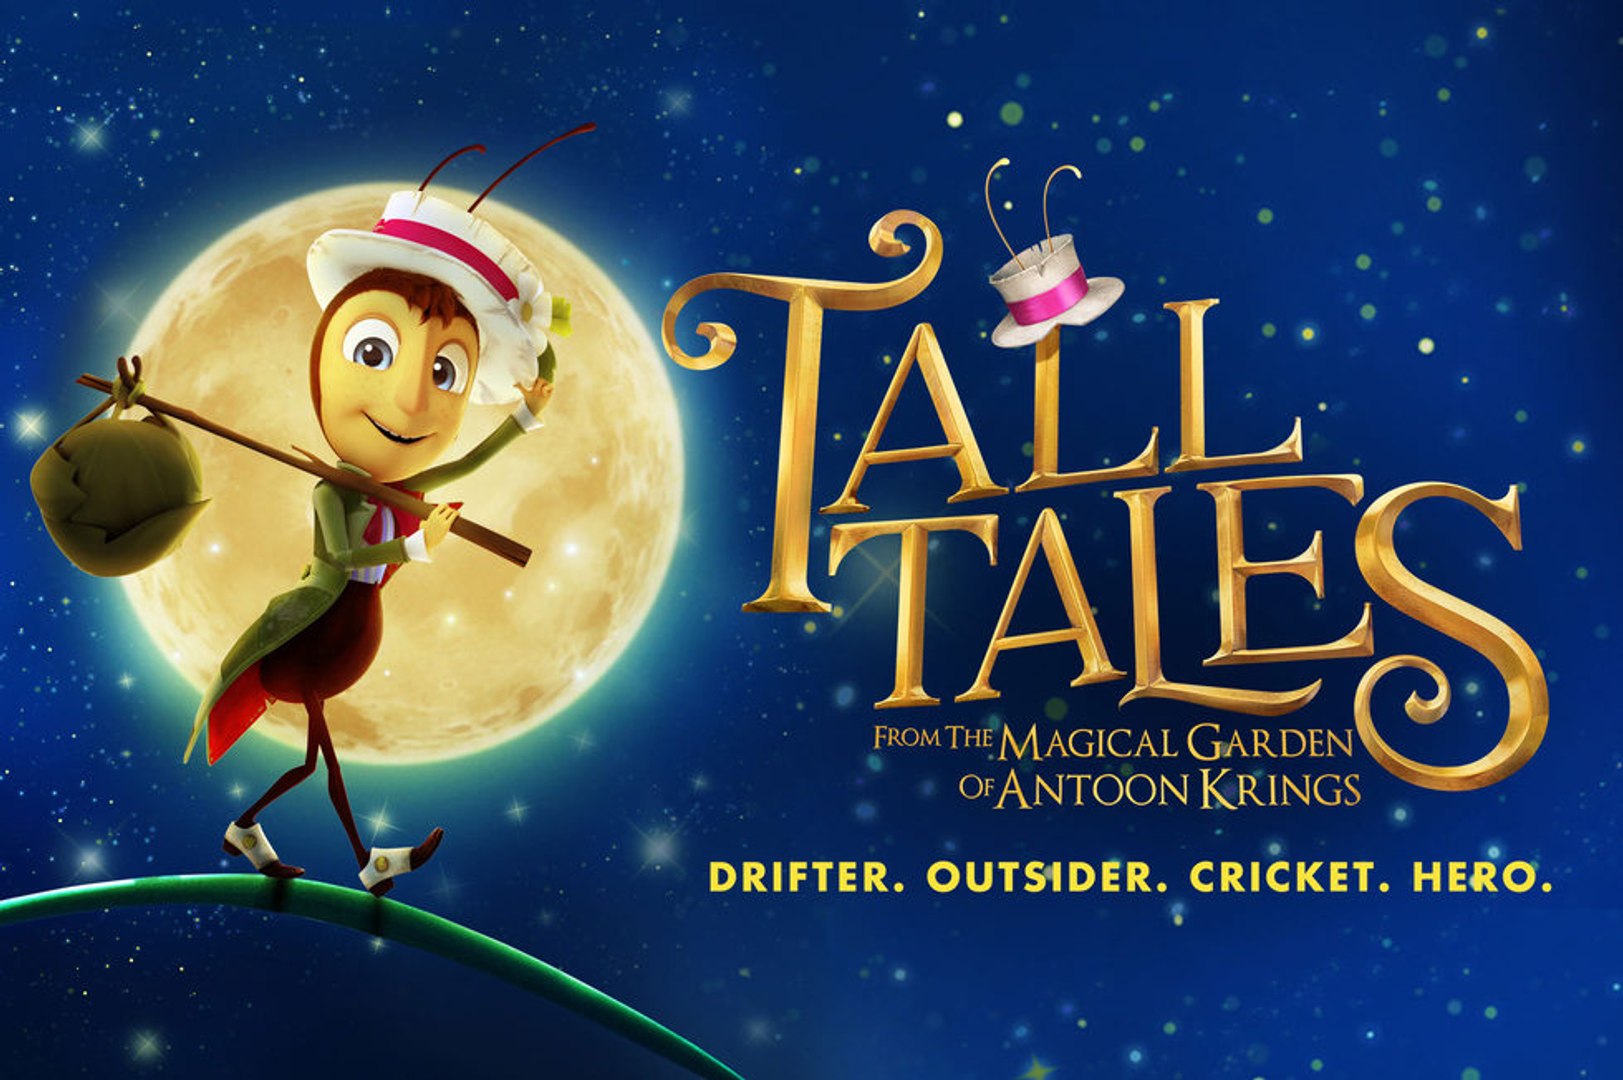 Tall Tales Trailer (2019) - video Dailymotion